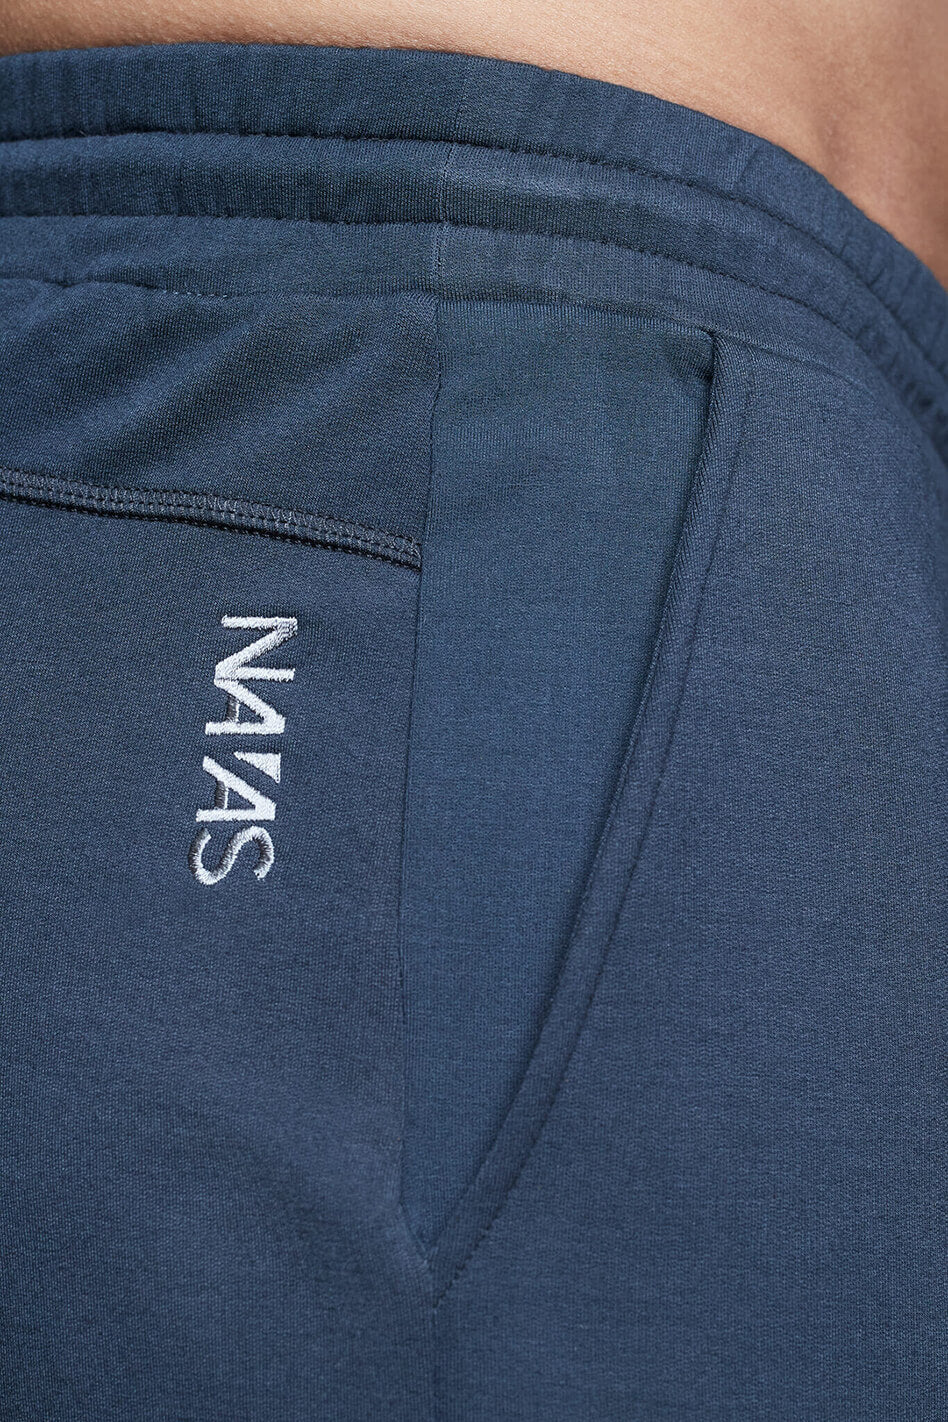 Mens tall sweatpants detail  in grey by Navas Lab. The perfect mens tall joggers for tall guys looking for style and comfort.